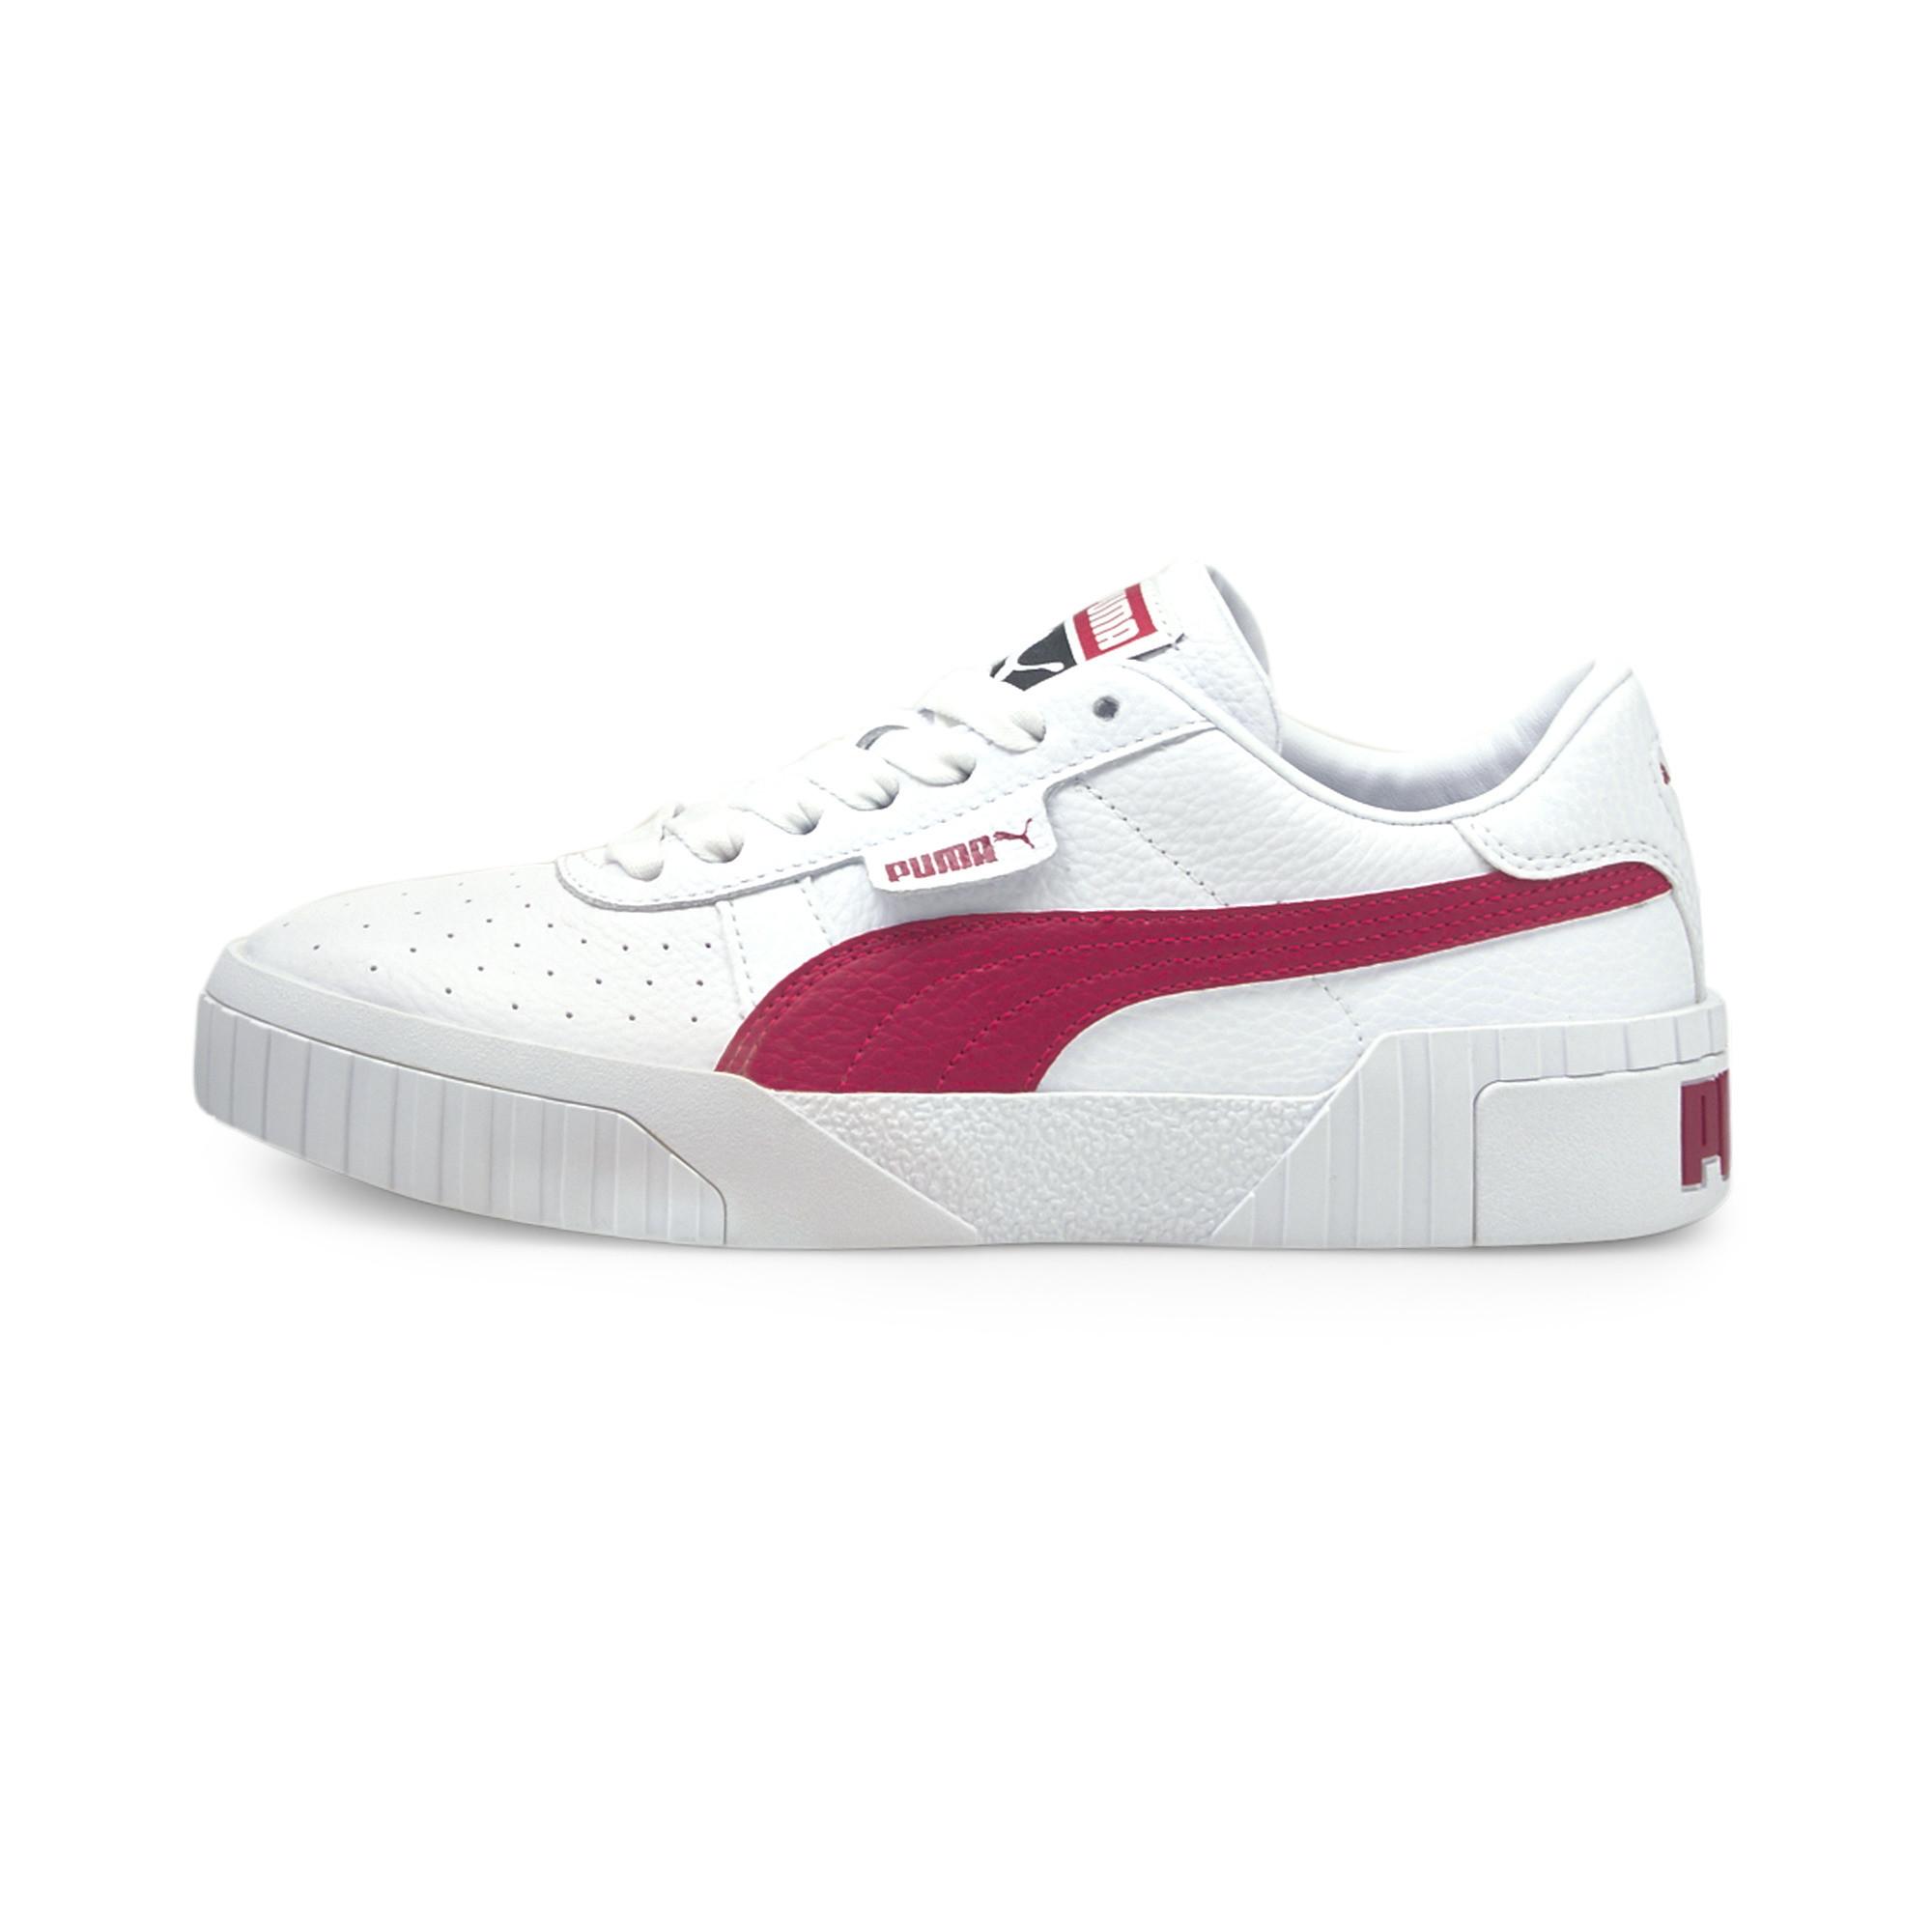 PUMA Leather Cali Sneakers in White - Lyst